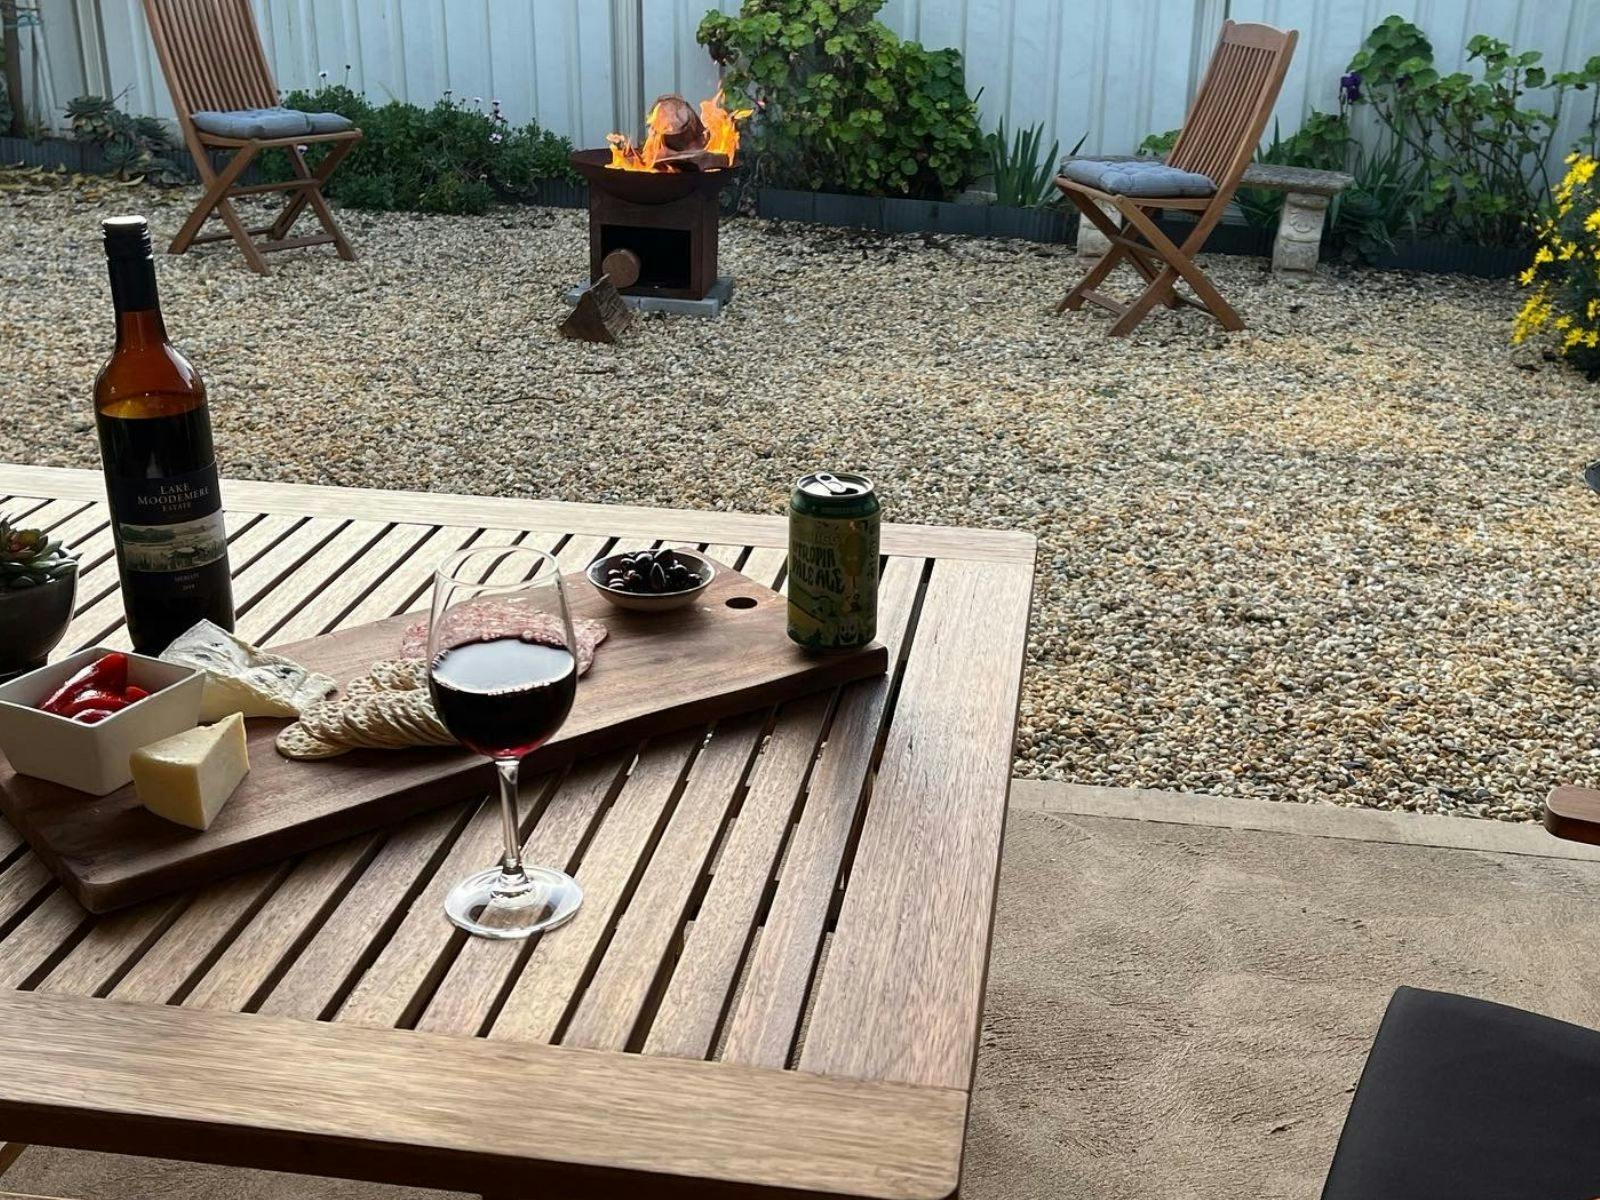 A wooden outdoor setting with wine and grazing platter. In the background a fire pit crackles away.